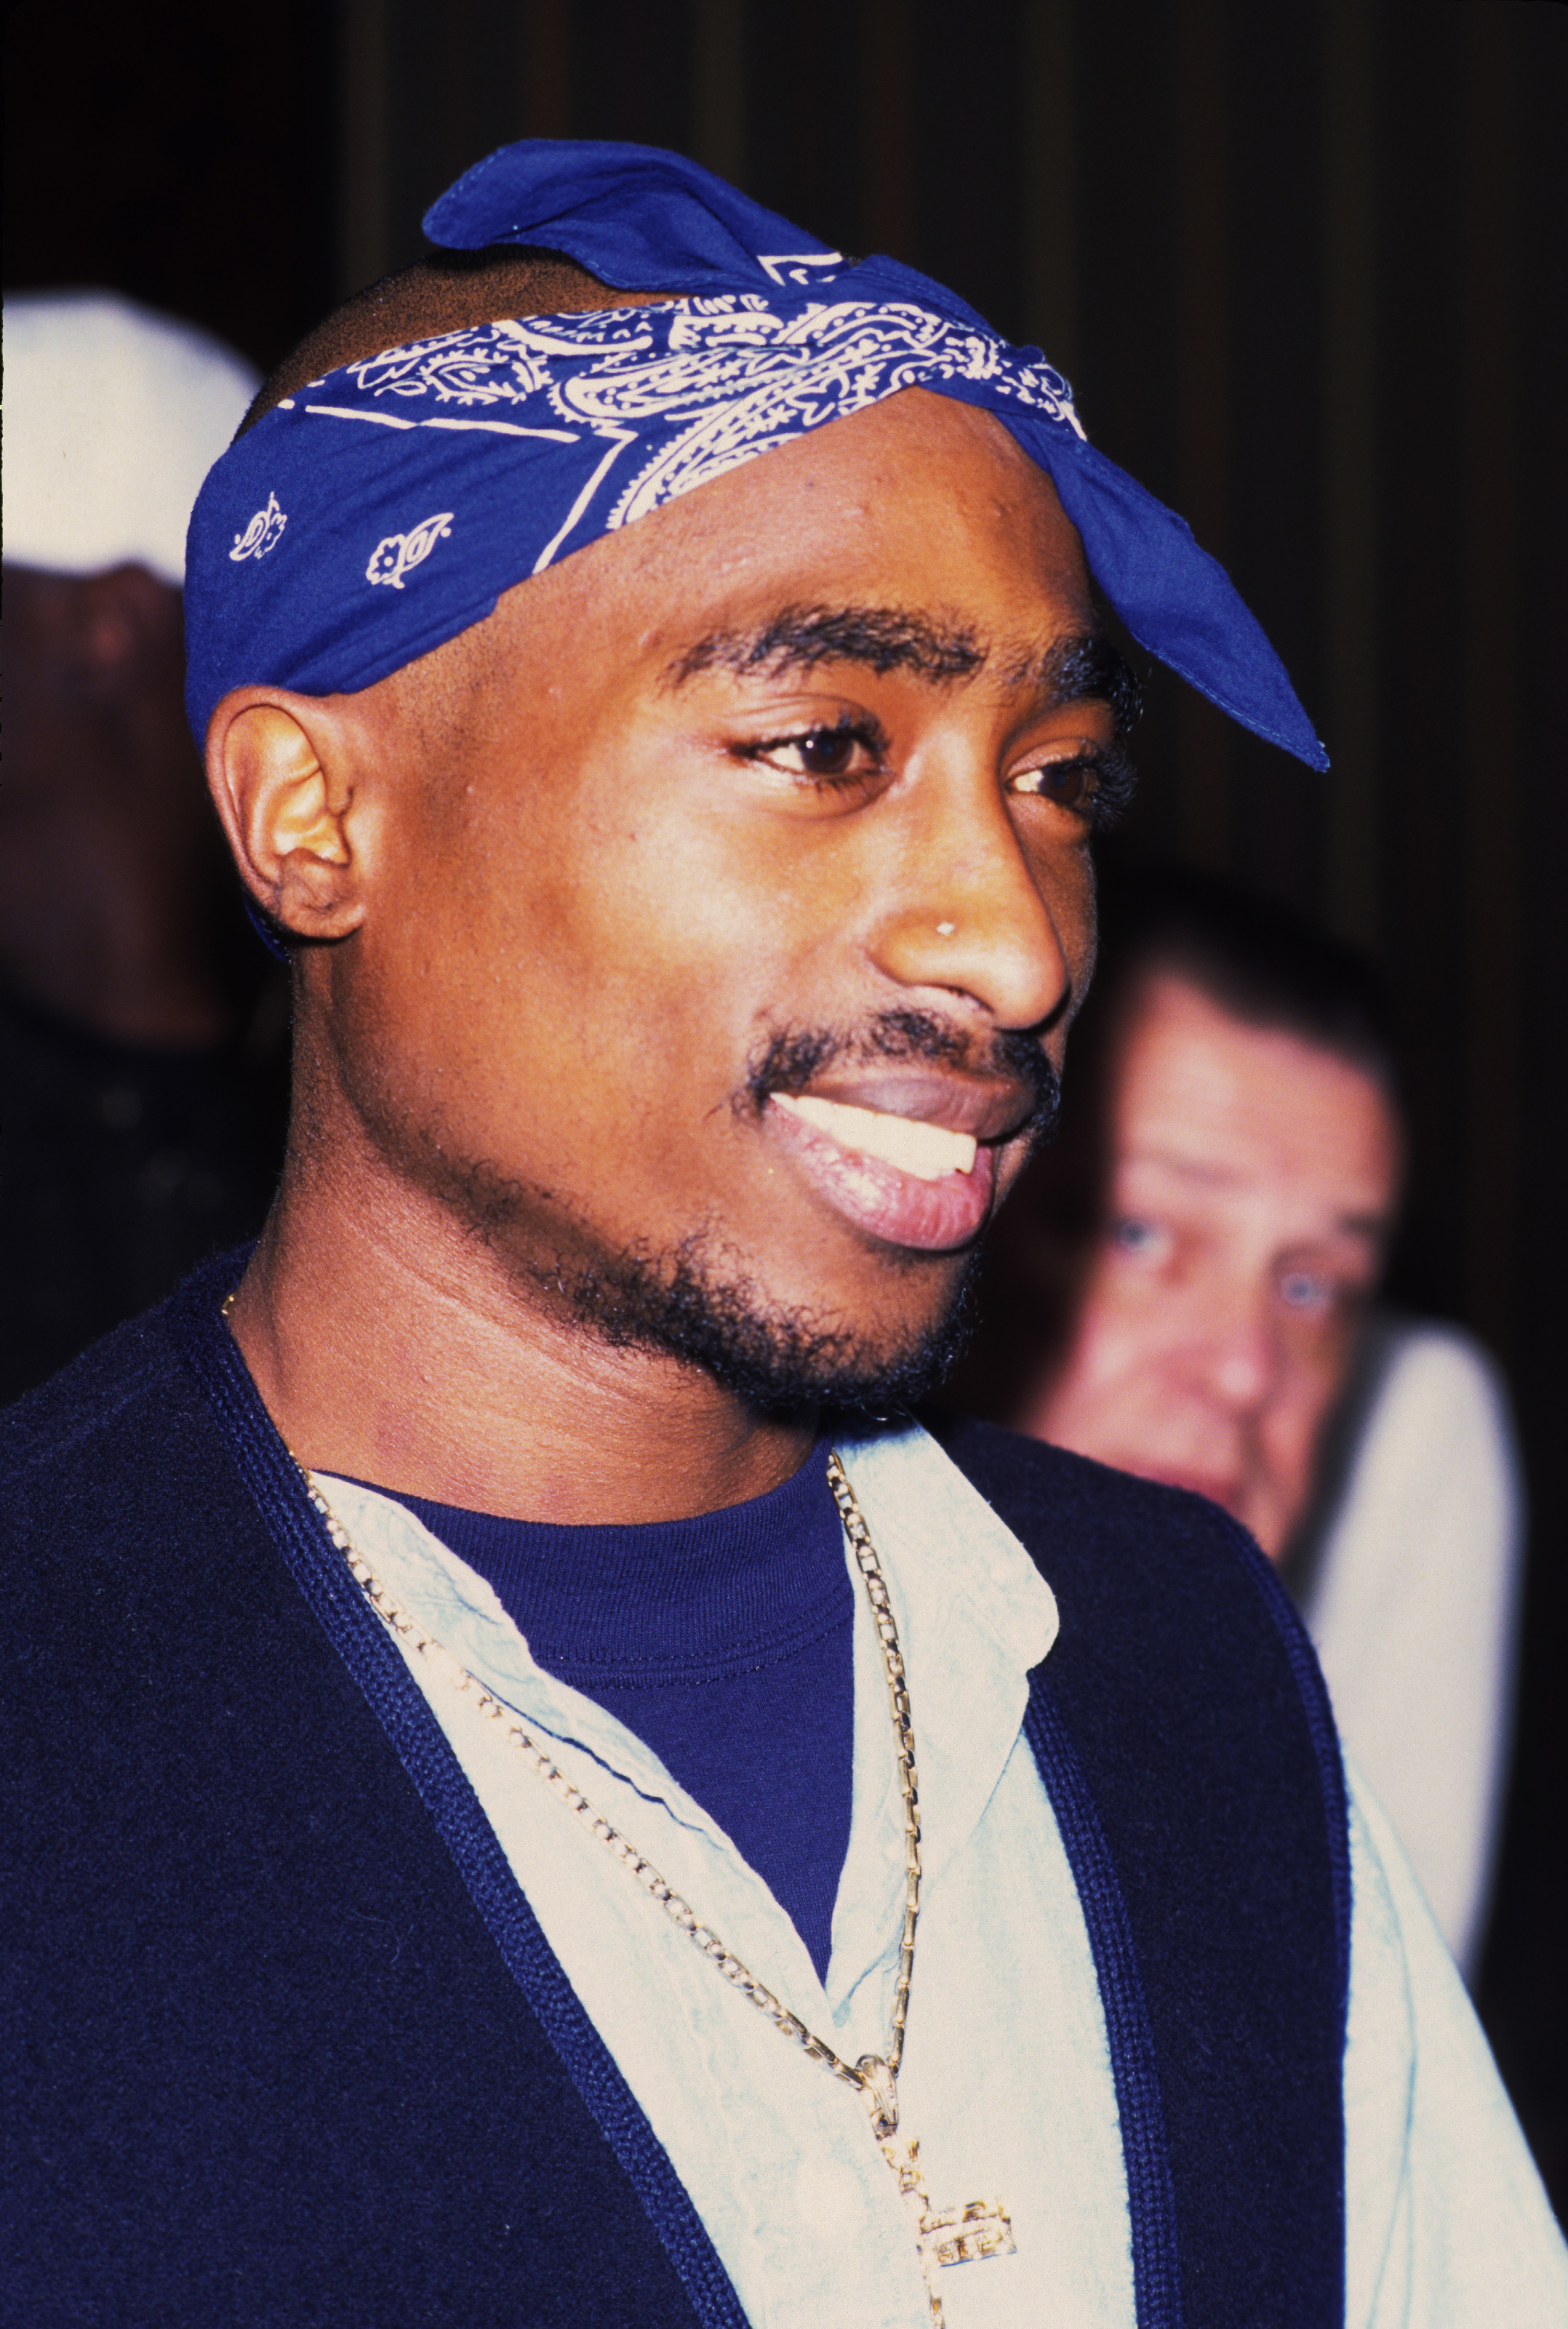 Tupac Shakur at a 1996 movie premiere in New York